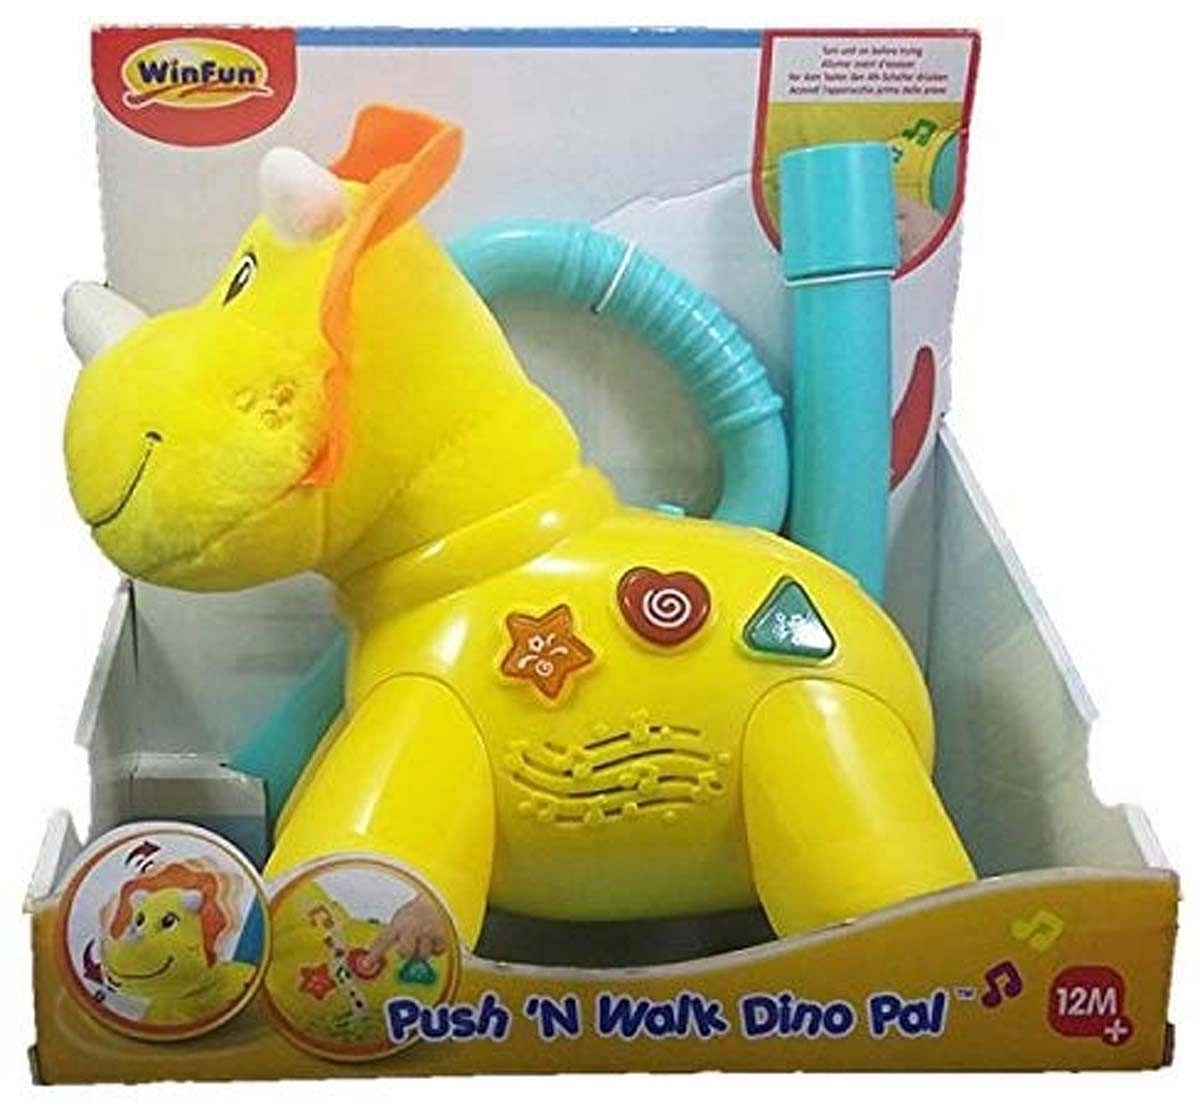 Winfun Push N Walk Dino Pal - Yellow Early Learner Toys for Kids age 12M+